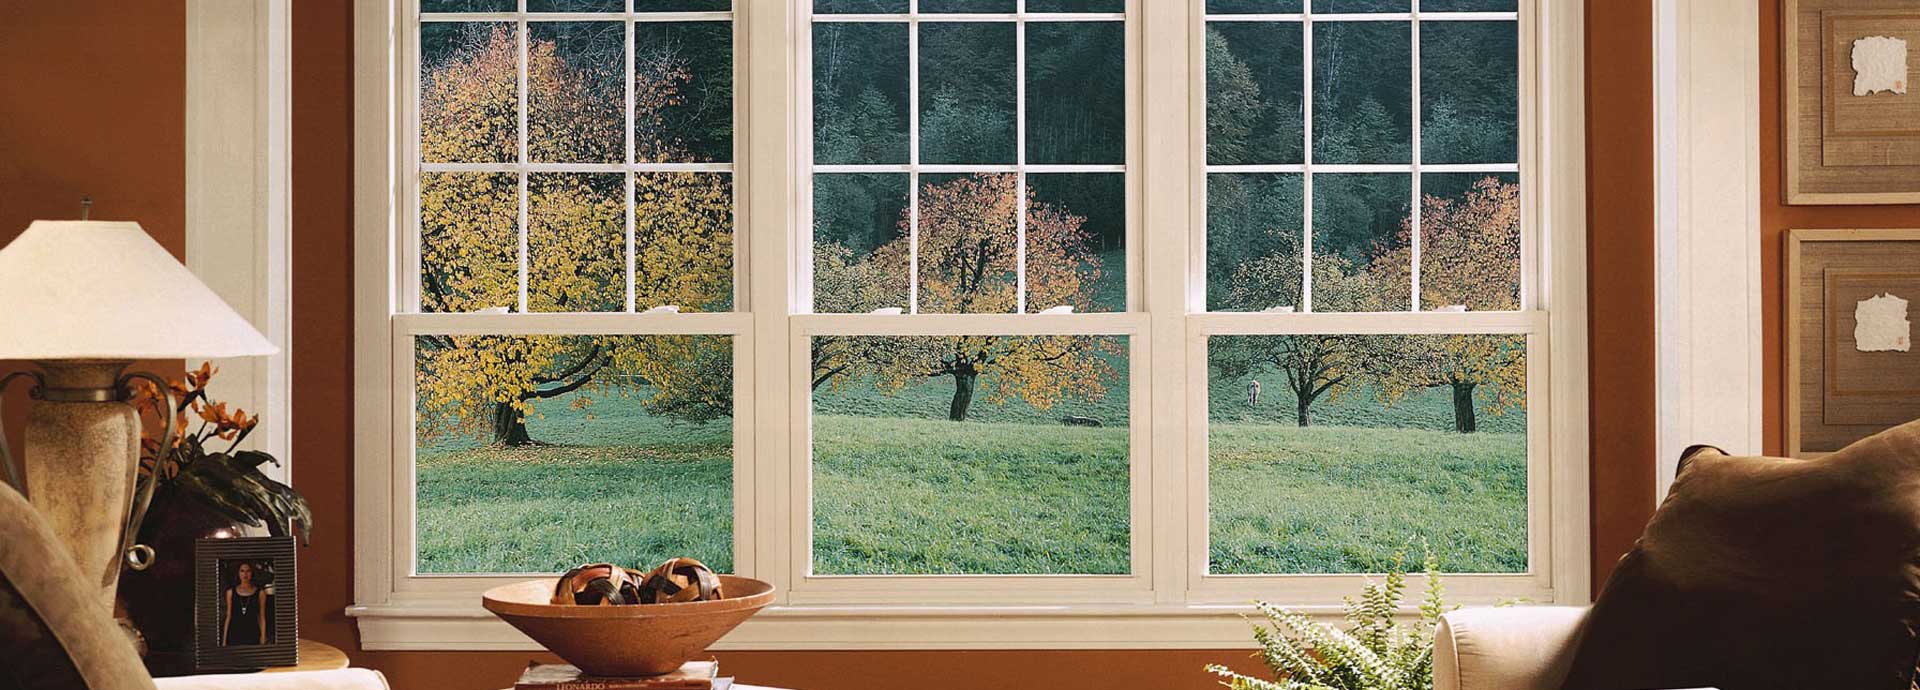 reliable window installers